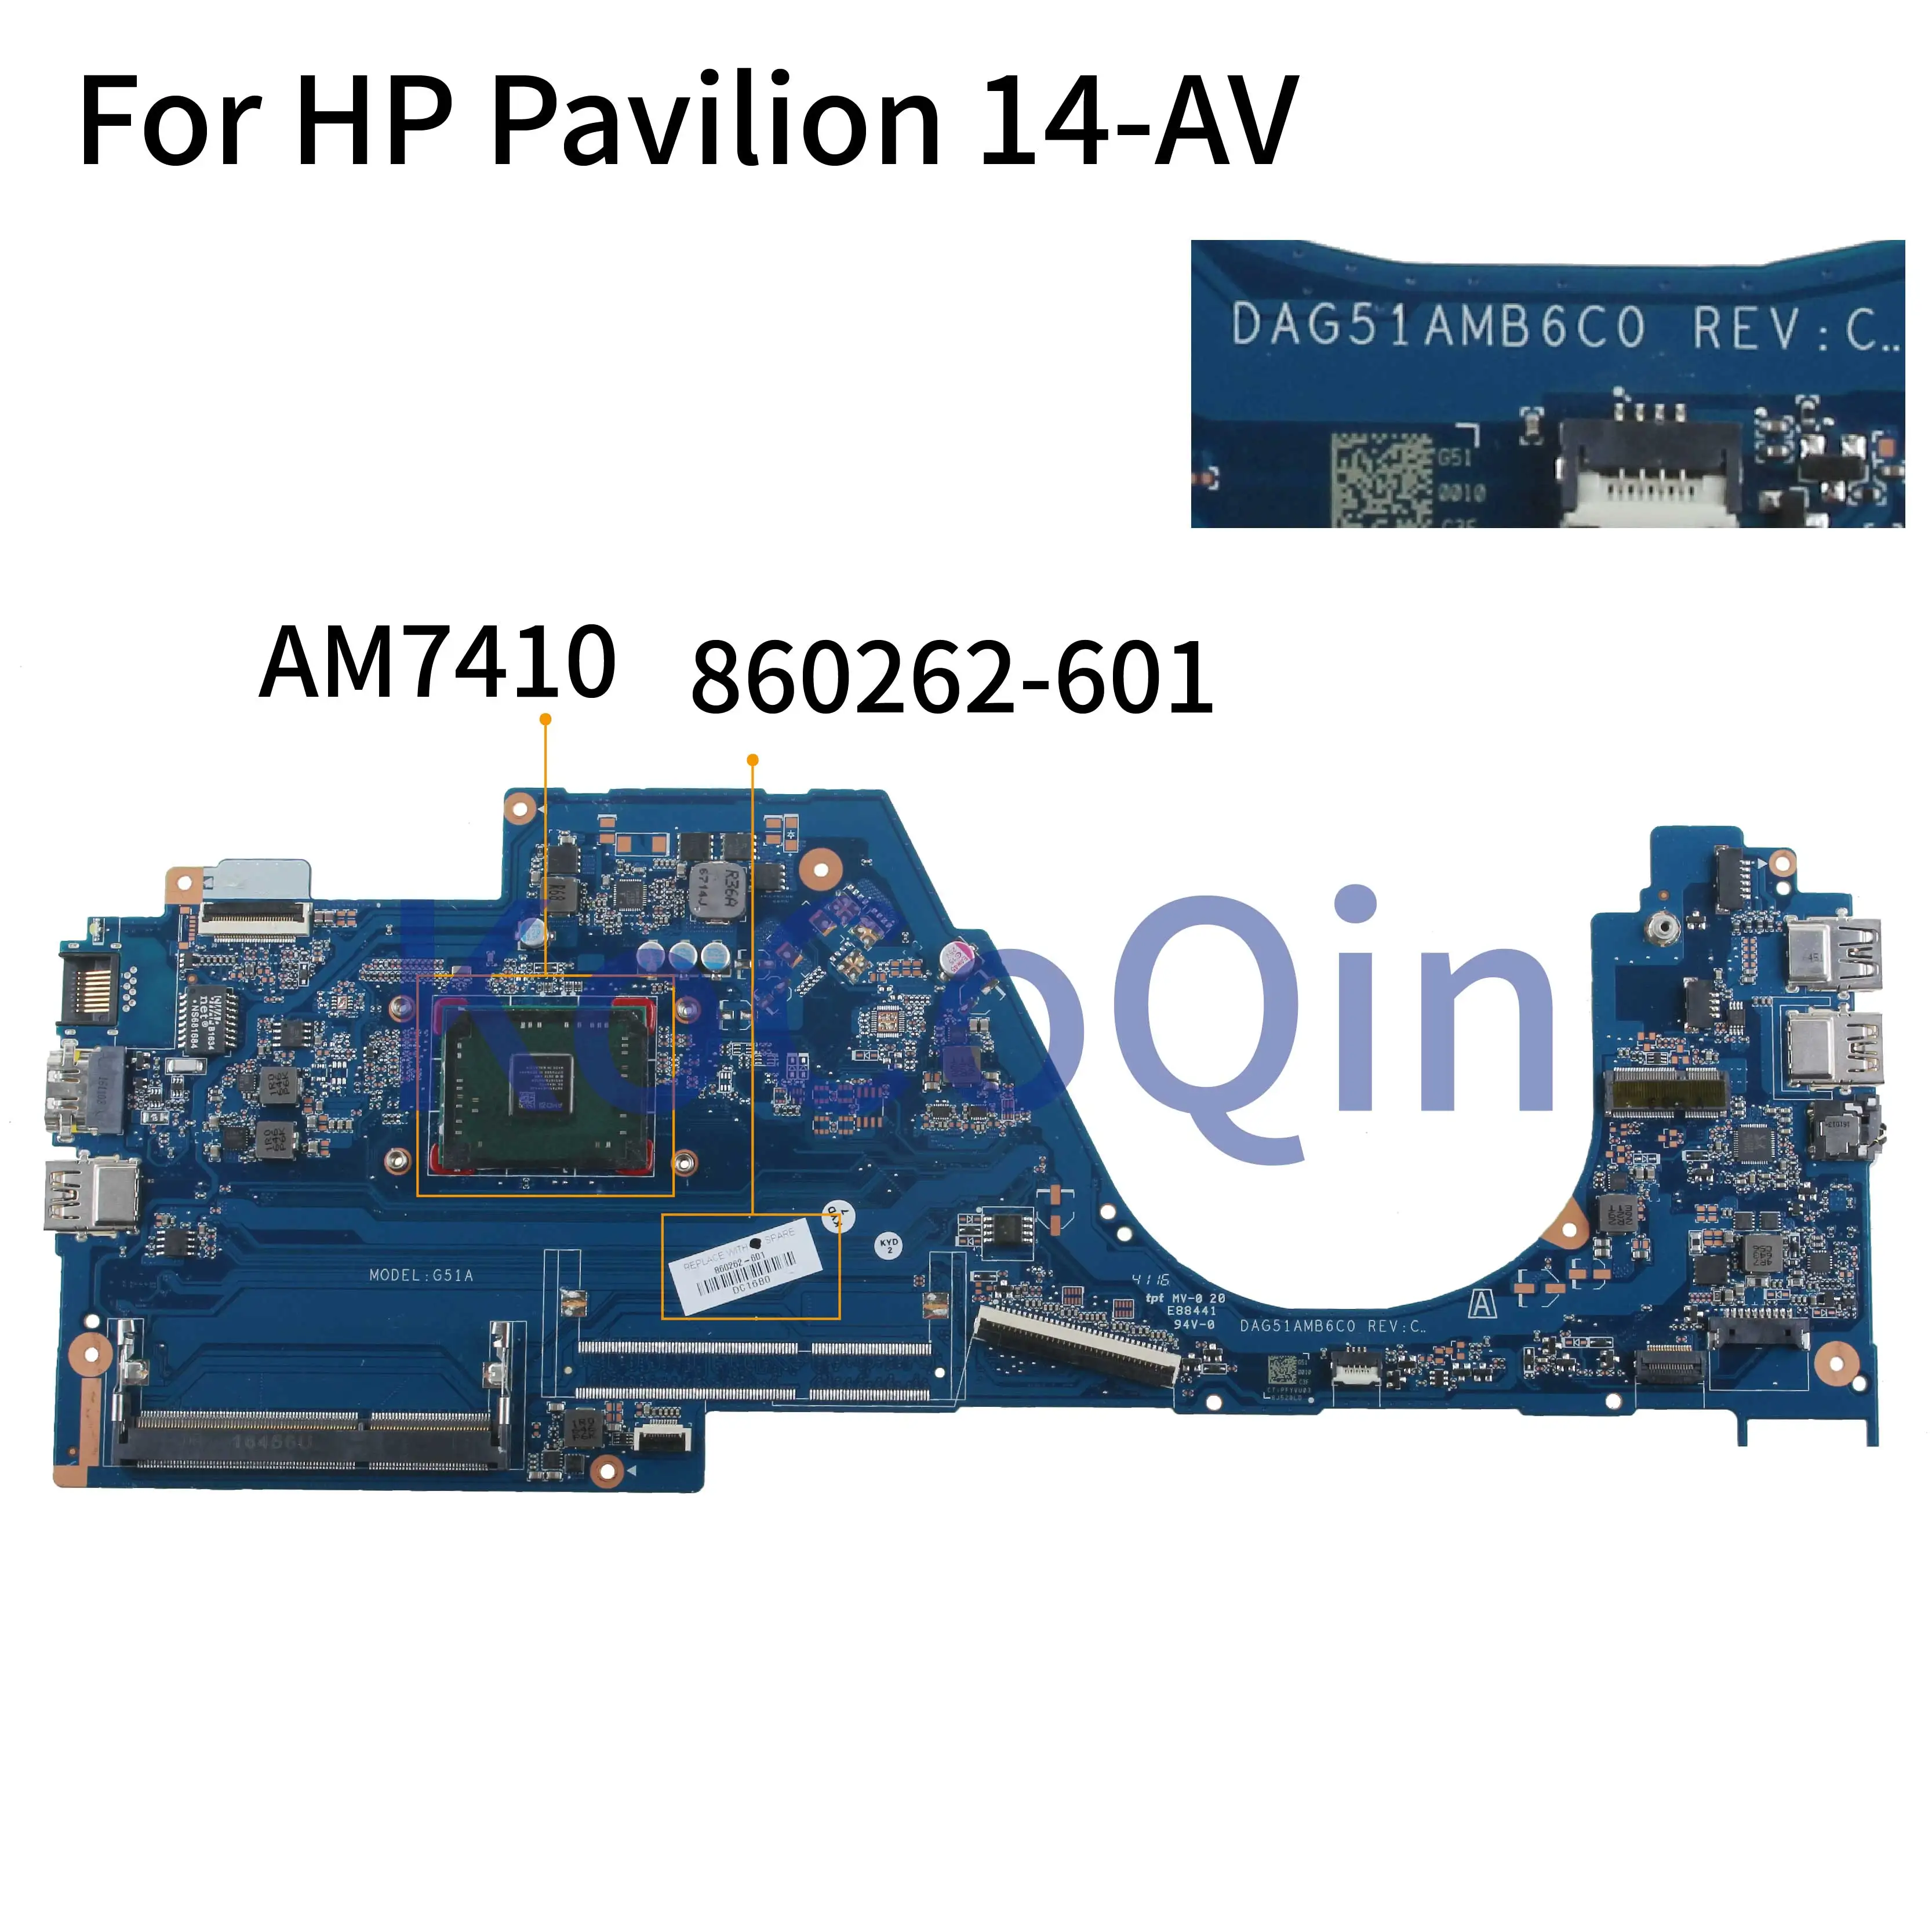 

KoCoQin Laptop motherboard For HP Pavilion 14-AV Core A8-7410 Mainboard 860262-001 860262-601 DAG51AMB6C0 AM7410 CPU